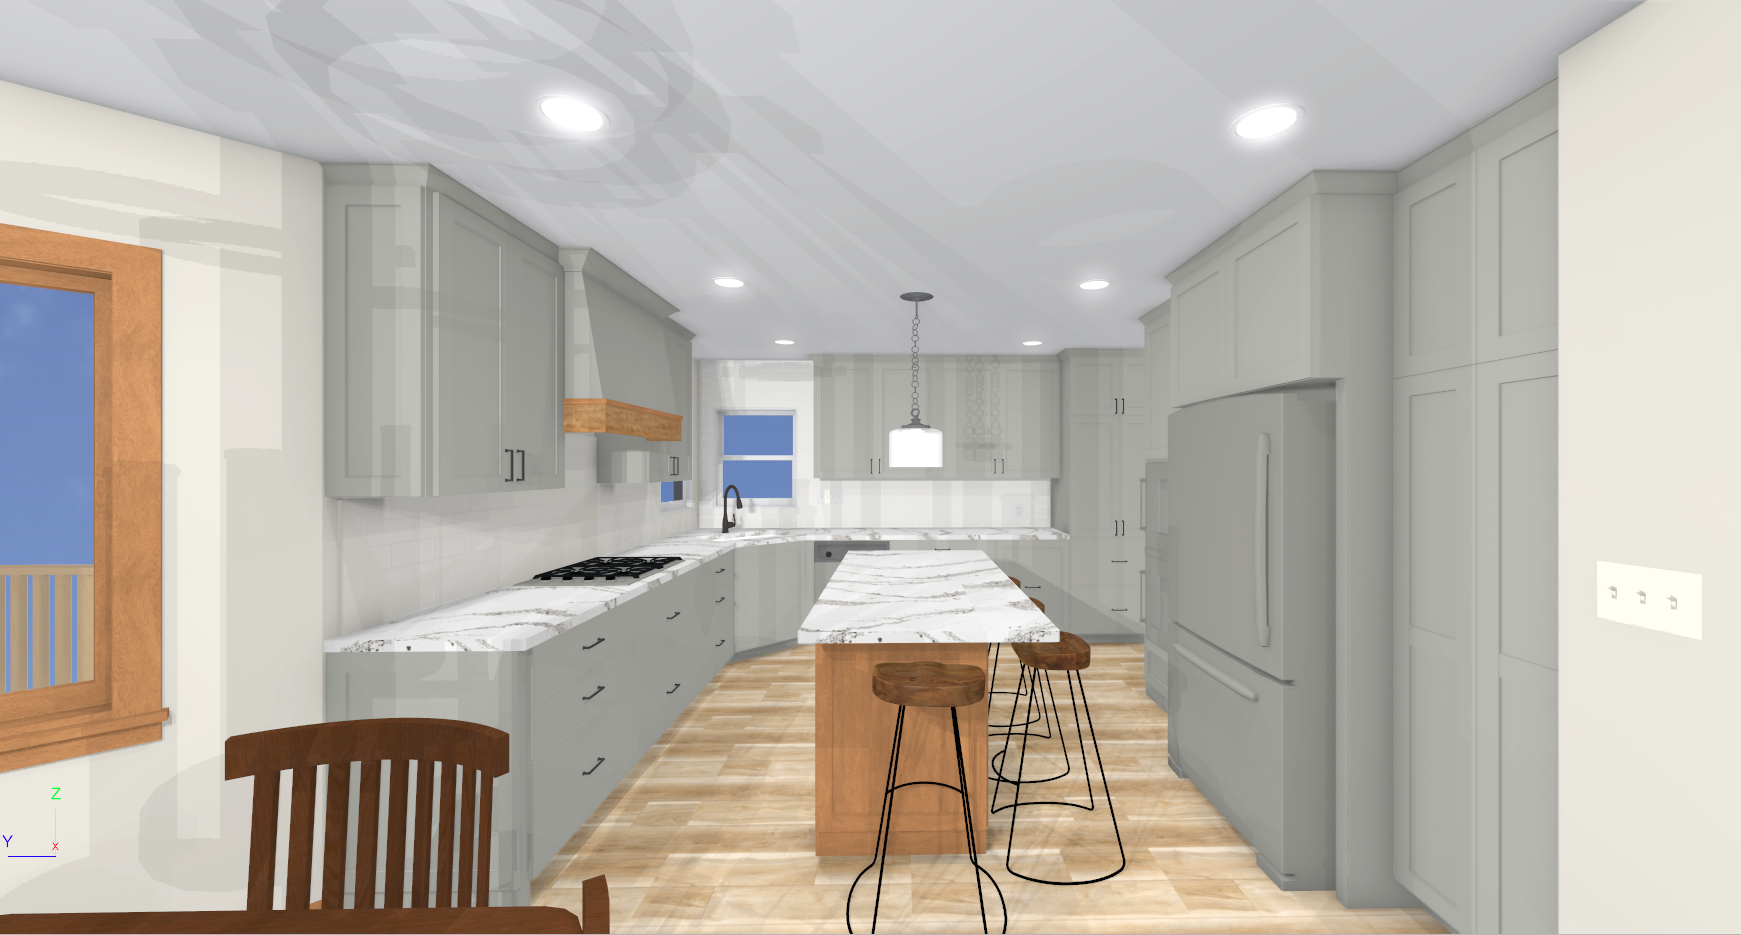 RENDERING FOR KITCHEN (Copy)